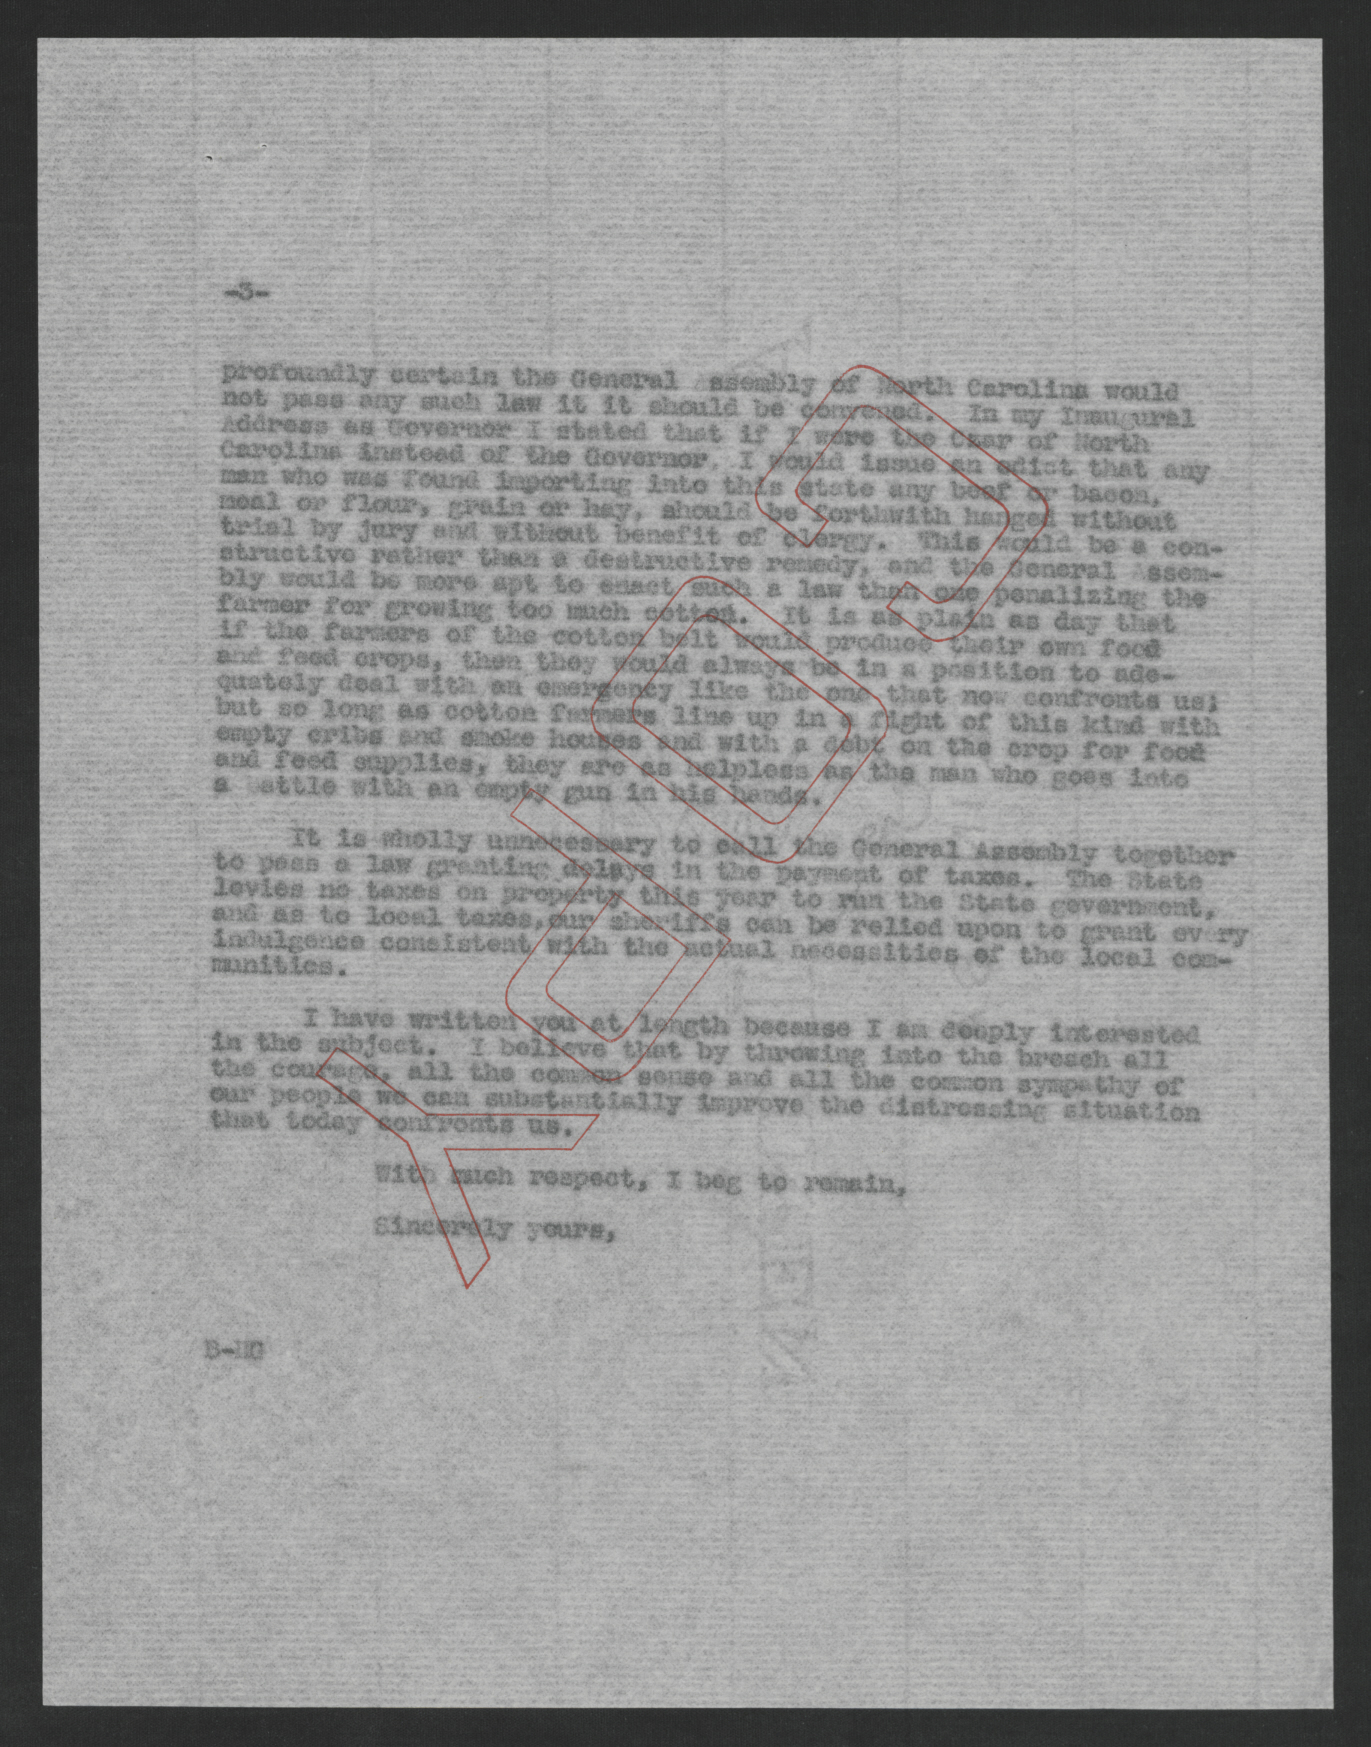 Letter from Thomas W. Bickett to John S. Wannamaker, November 8, 1920, page 3